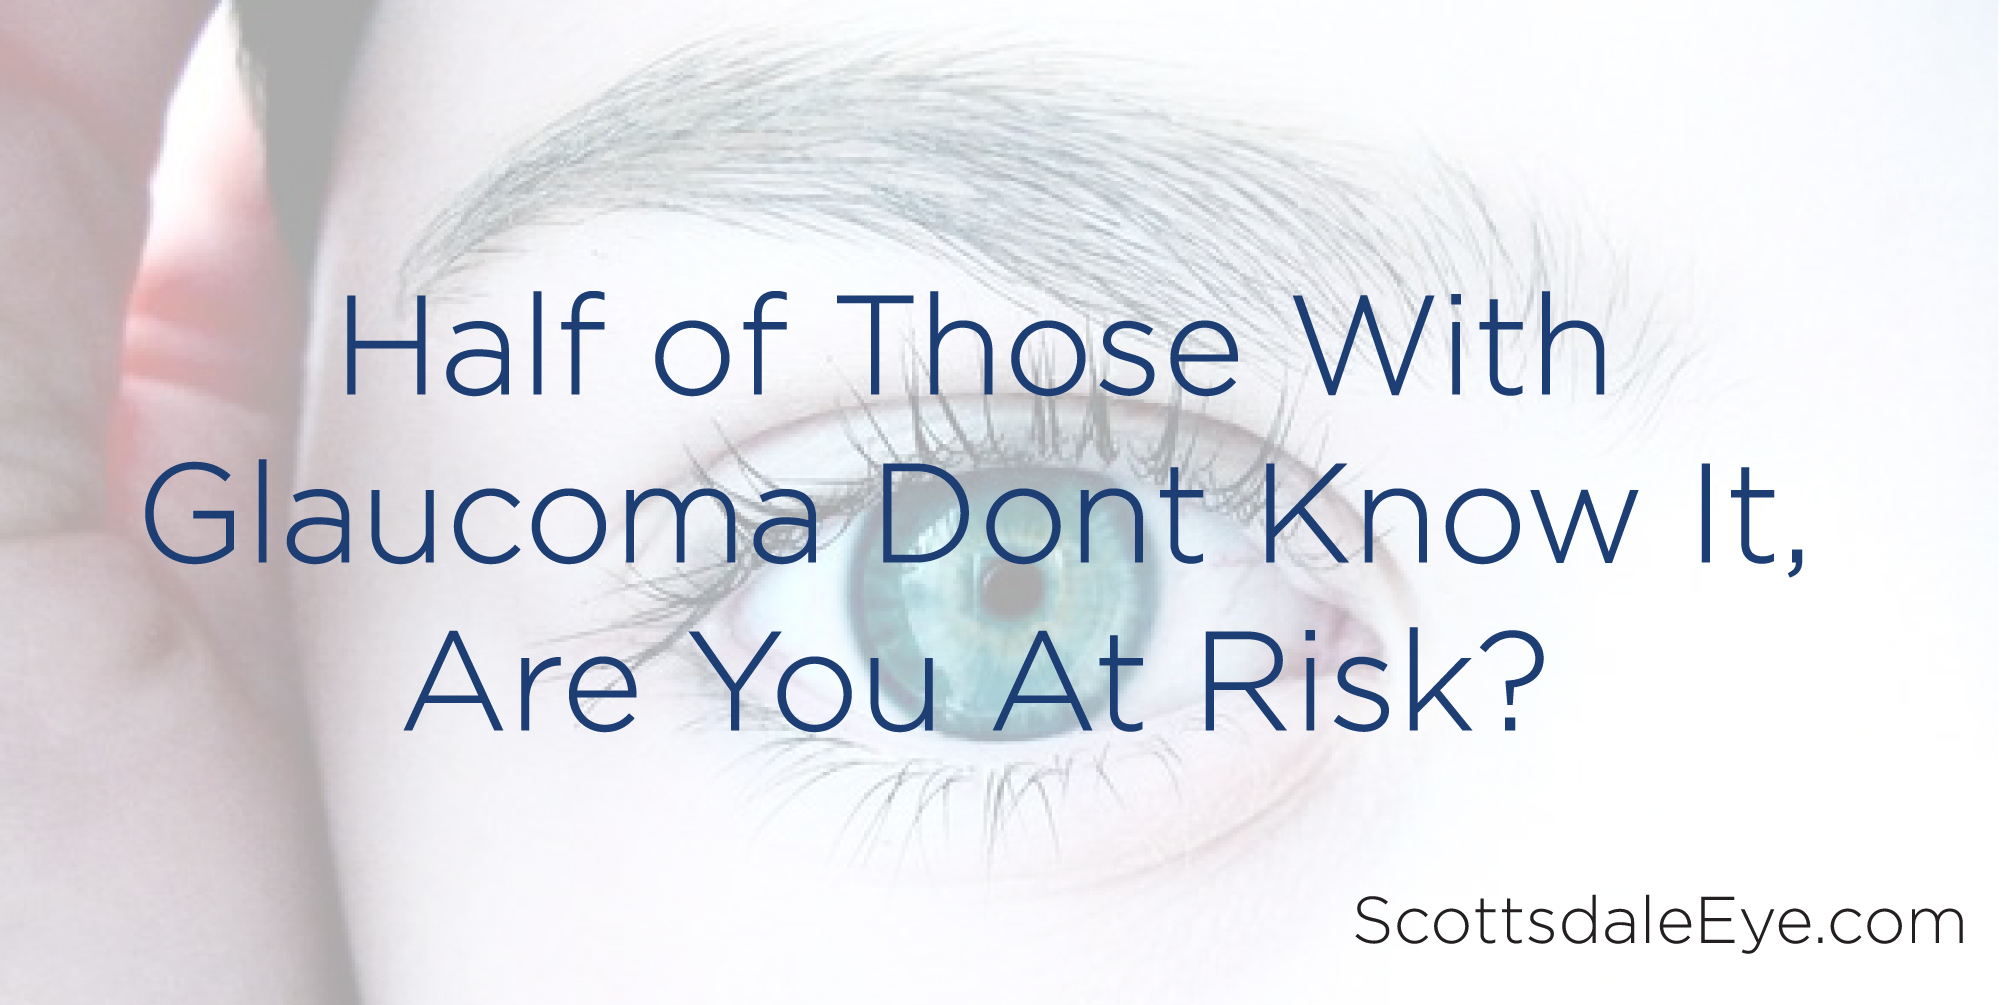 Half of Those with Glaucoma Don’t Know It; Are You At Risk?